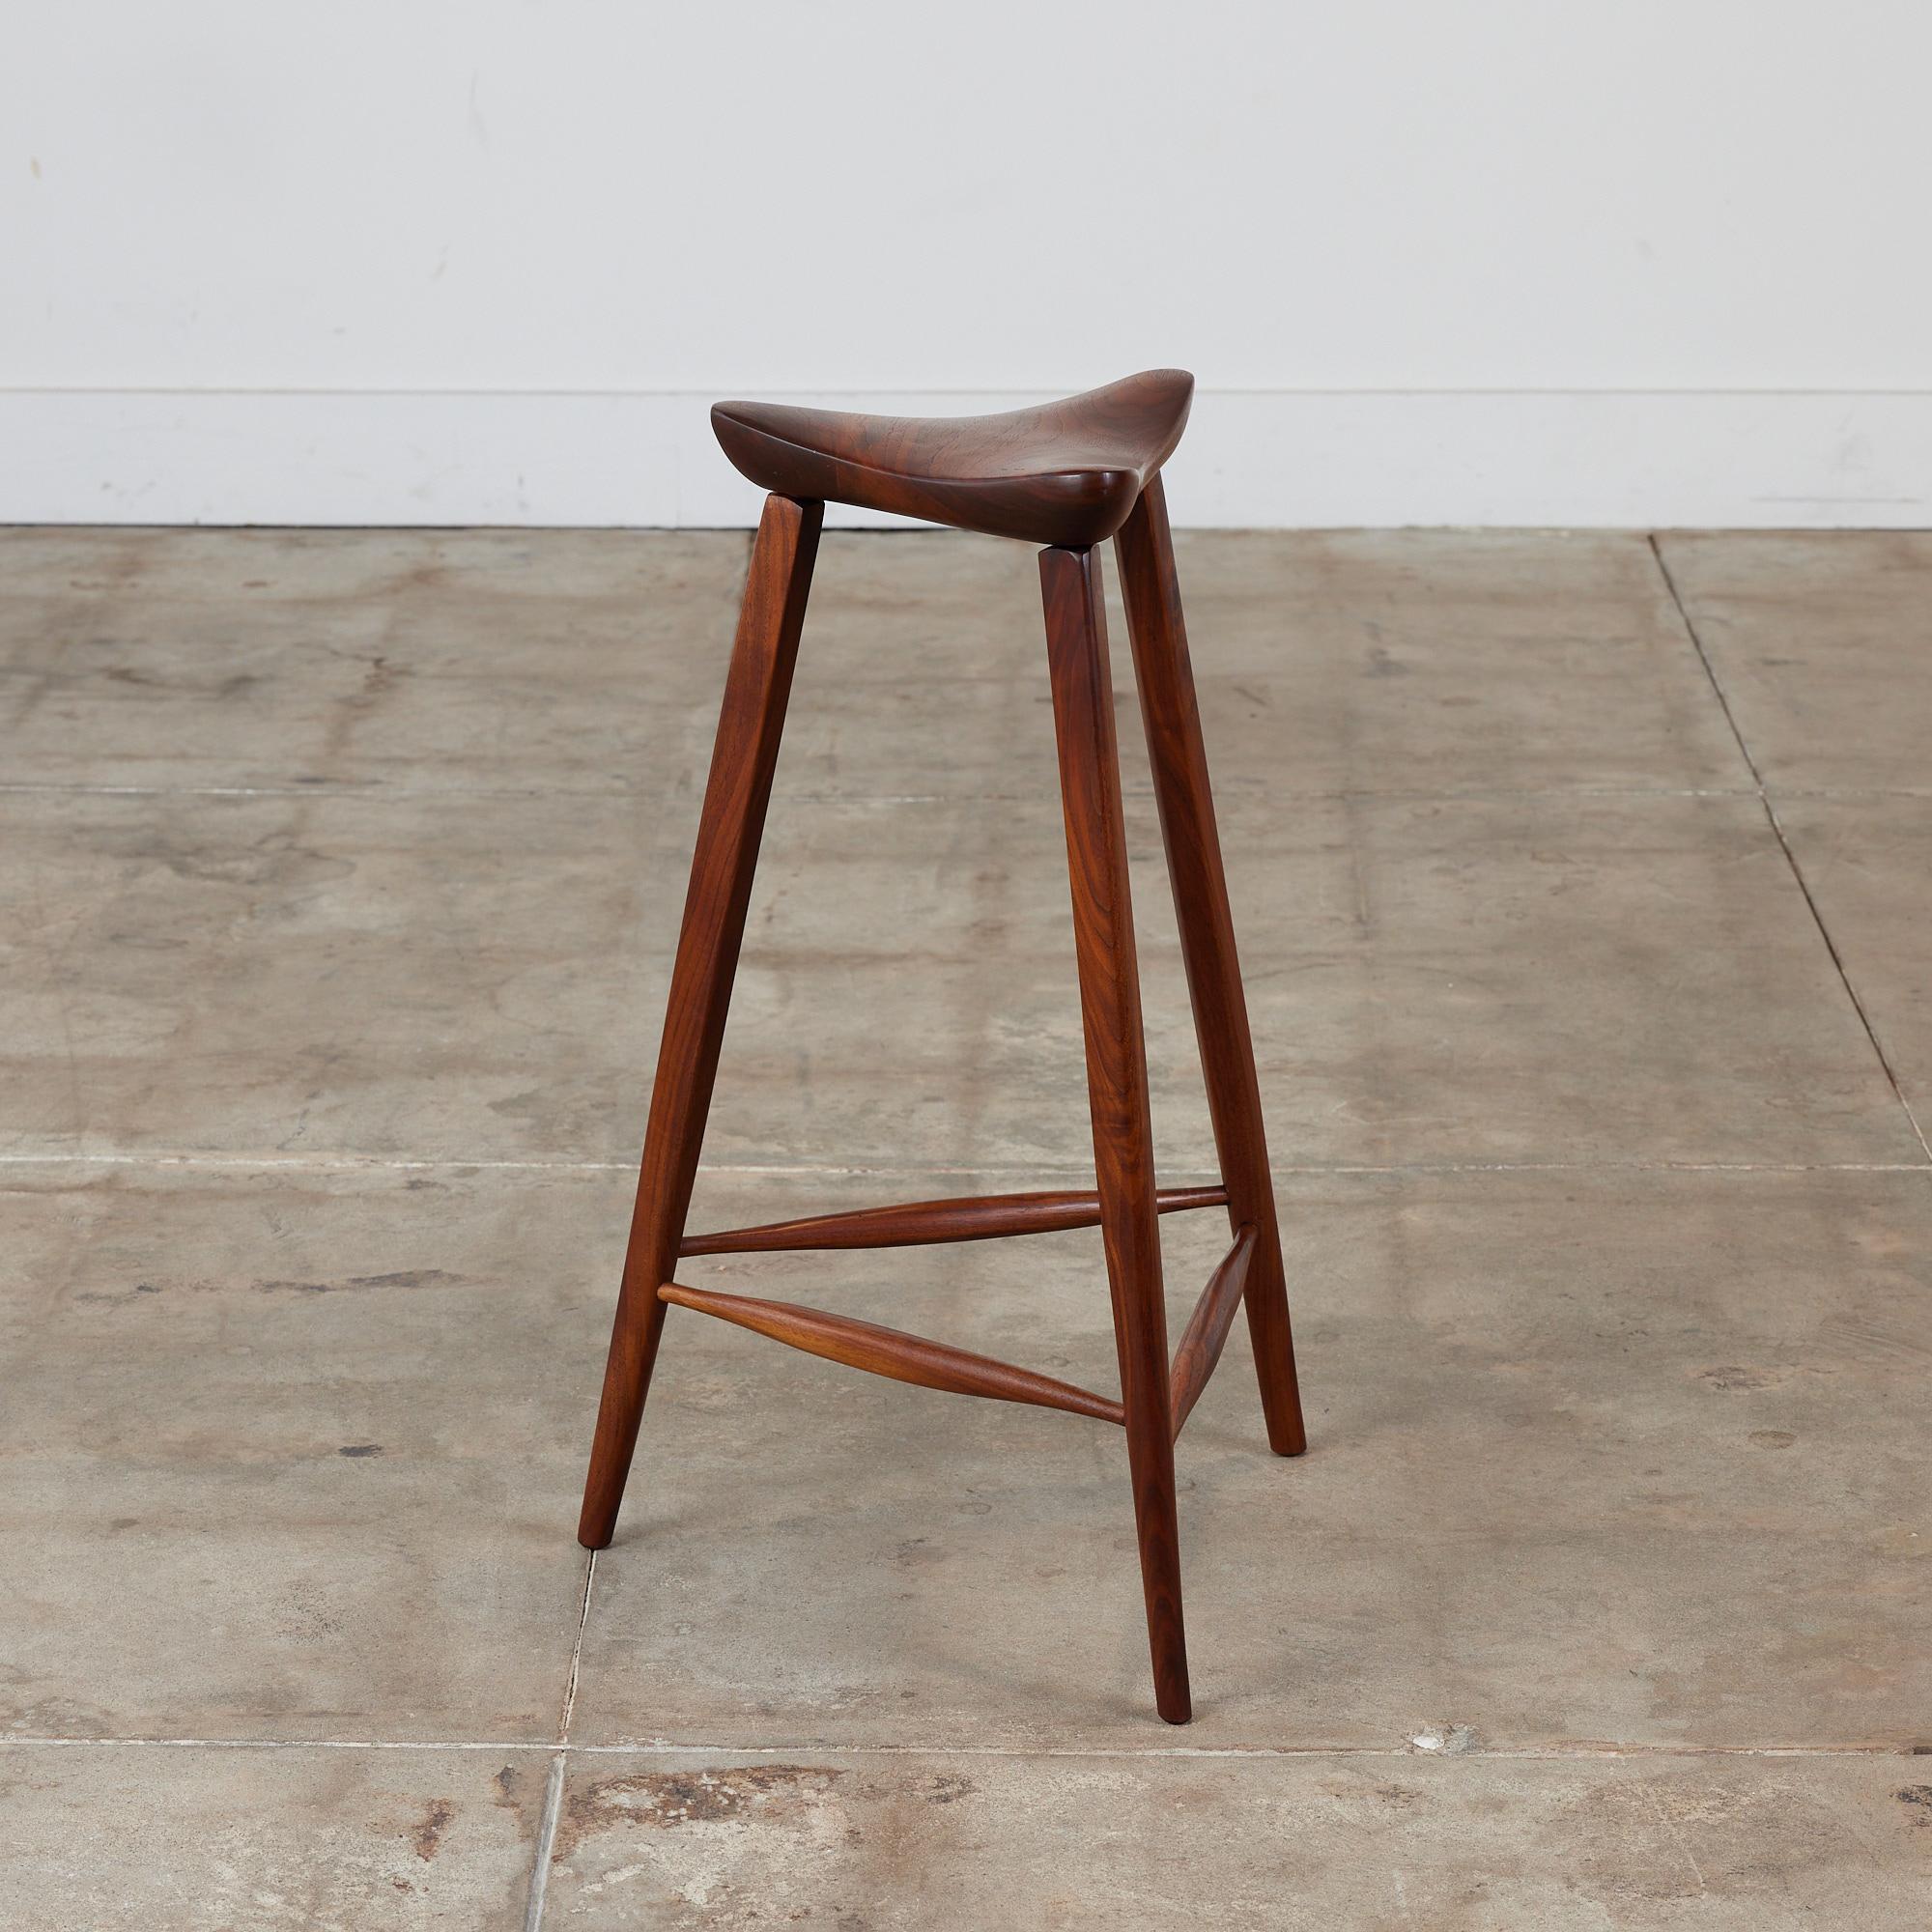 Triangular studio craft stool made in 1979. The walnut stool showcases a minimalist design with a triangular seat with soft edges and corners that slightly turn upwards. The stool is supported by three tapered dowel legs with stretchers.

Signed